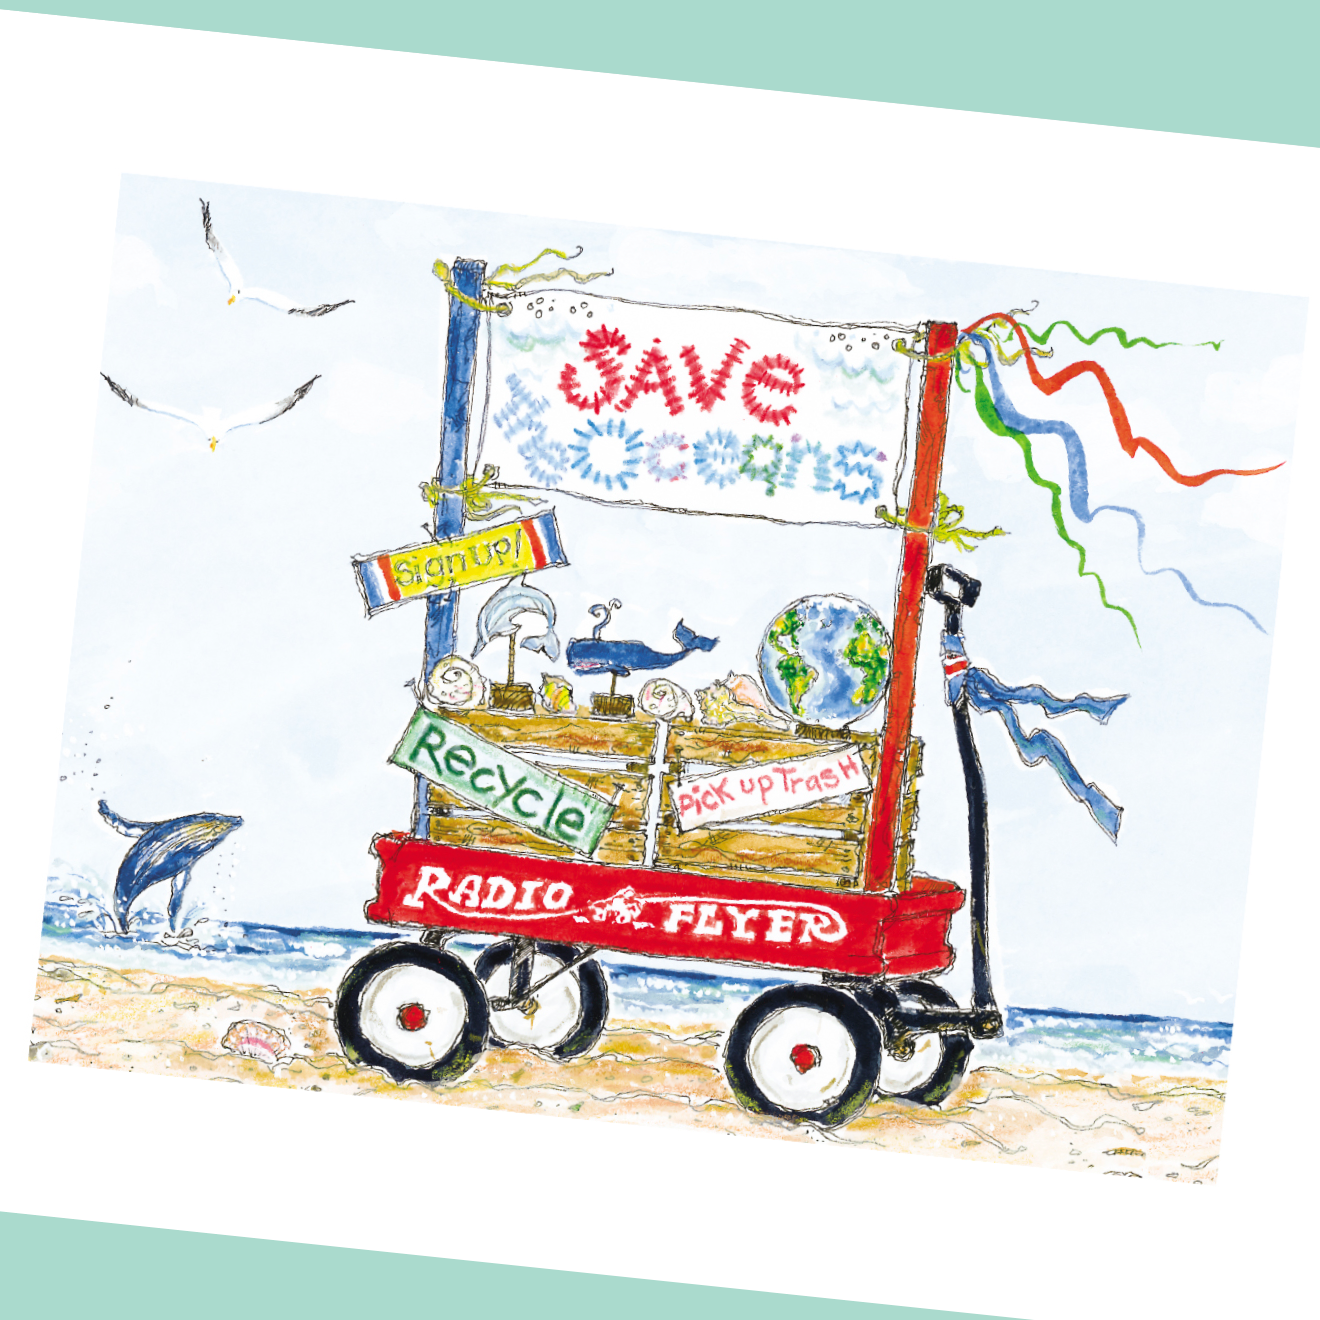 SAVE THE OCEANS 4x5 Postcards with Envelopes - SET OF 10